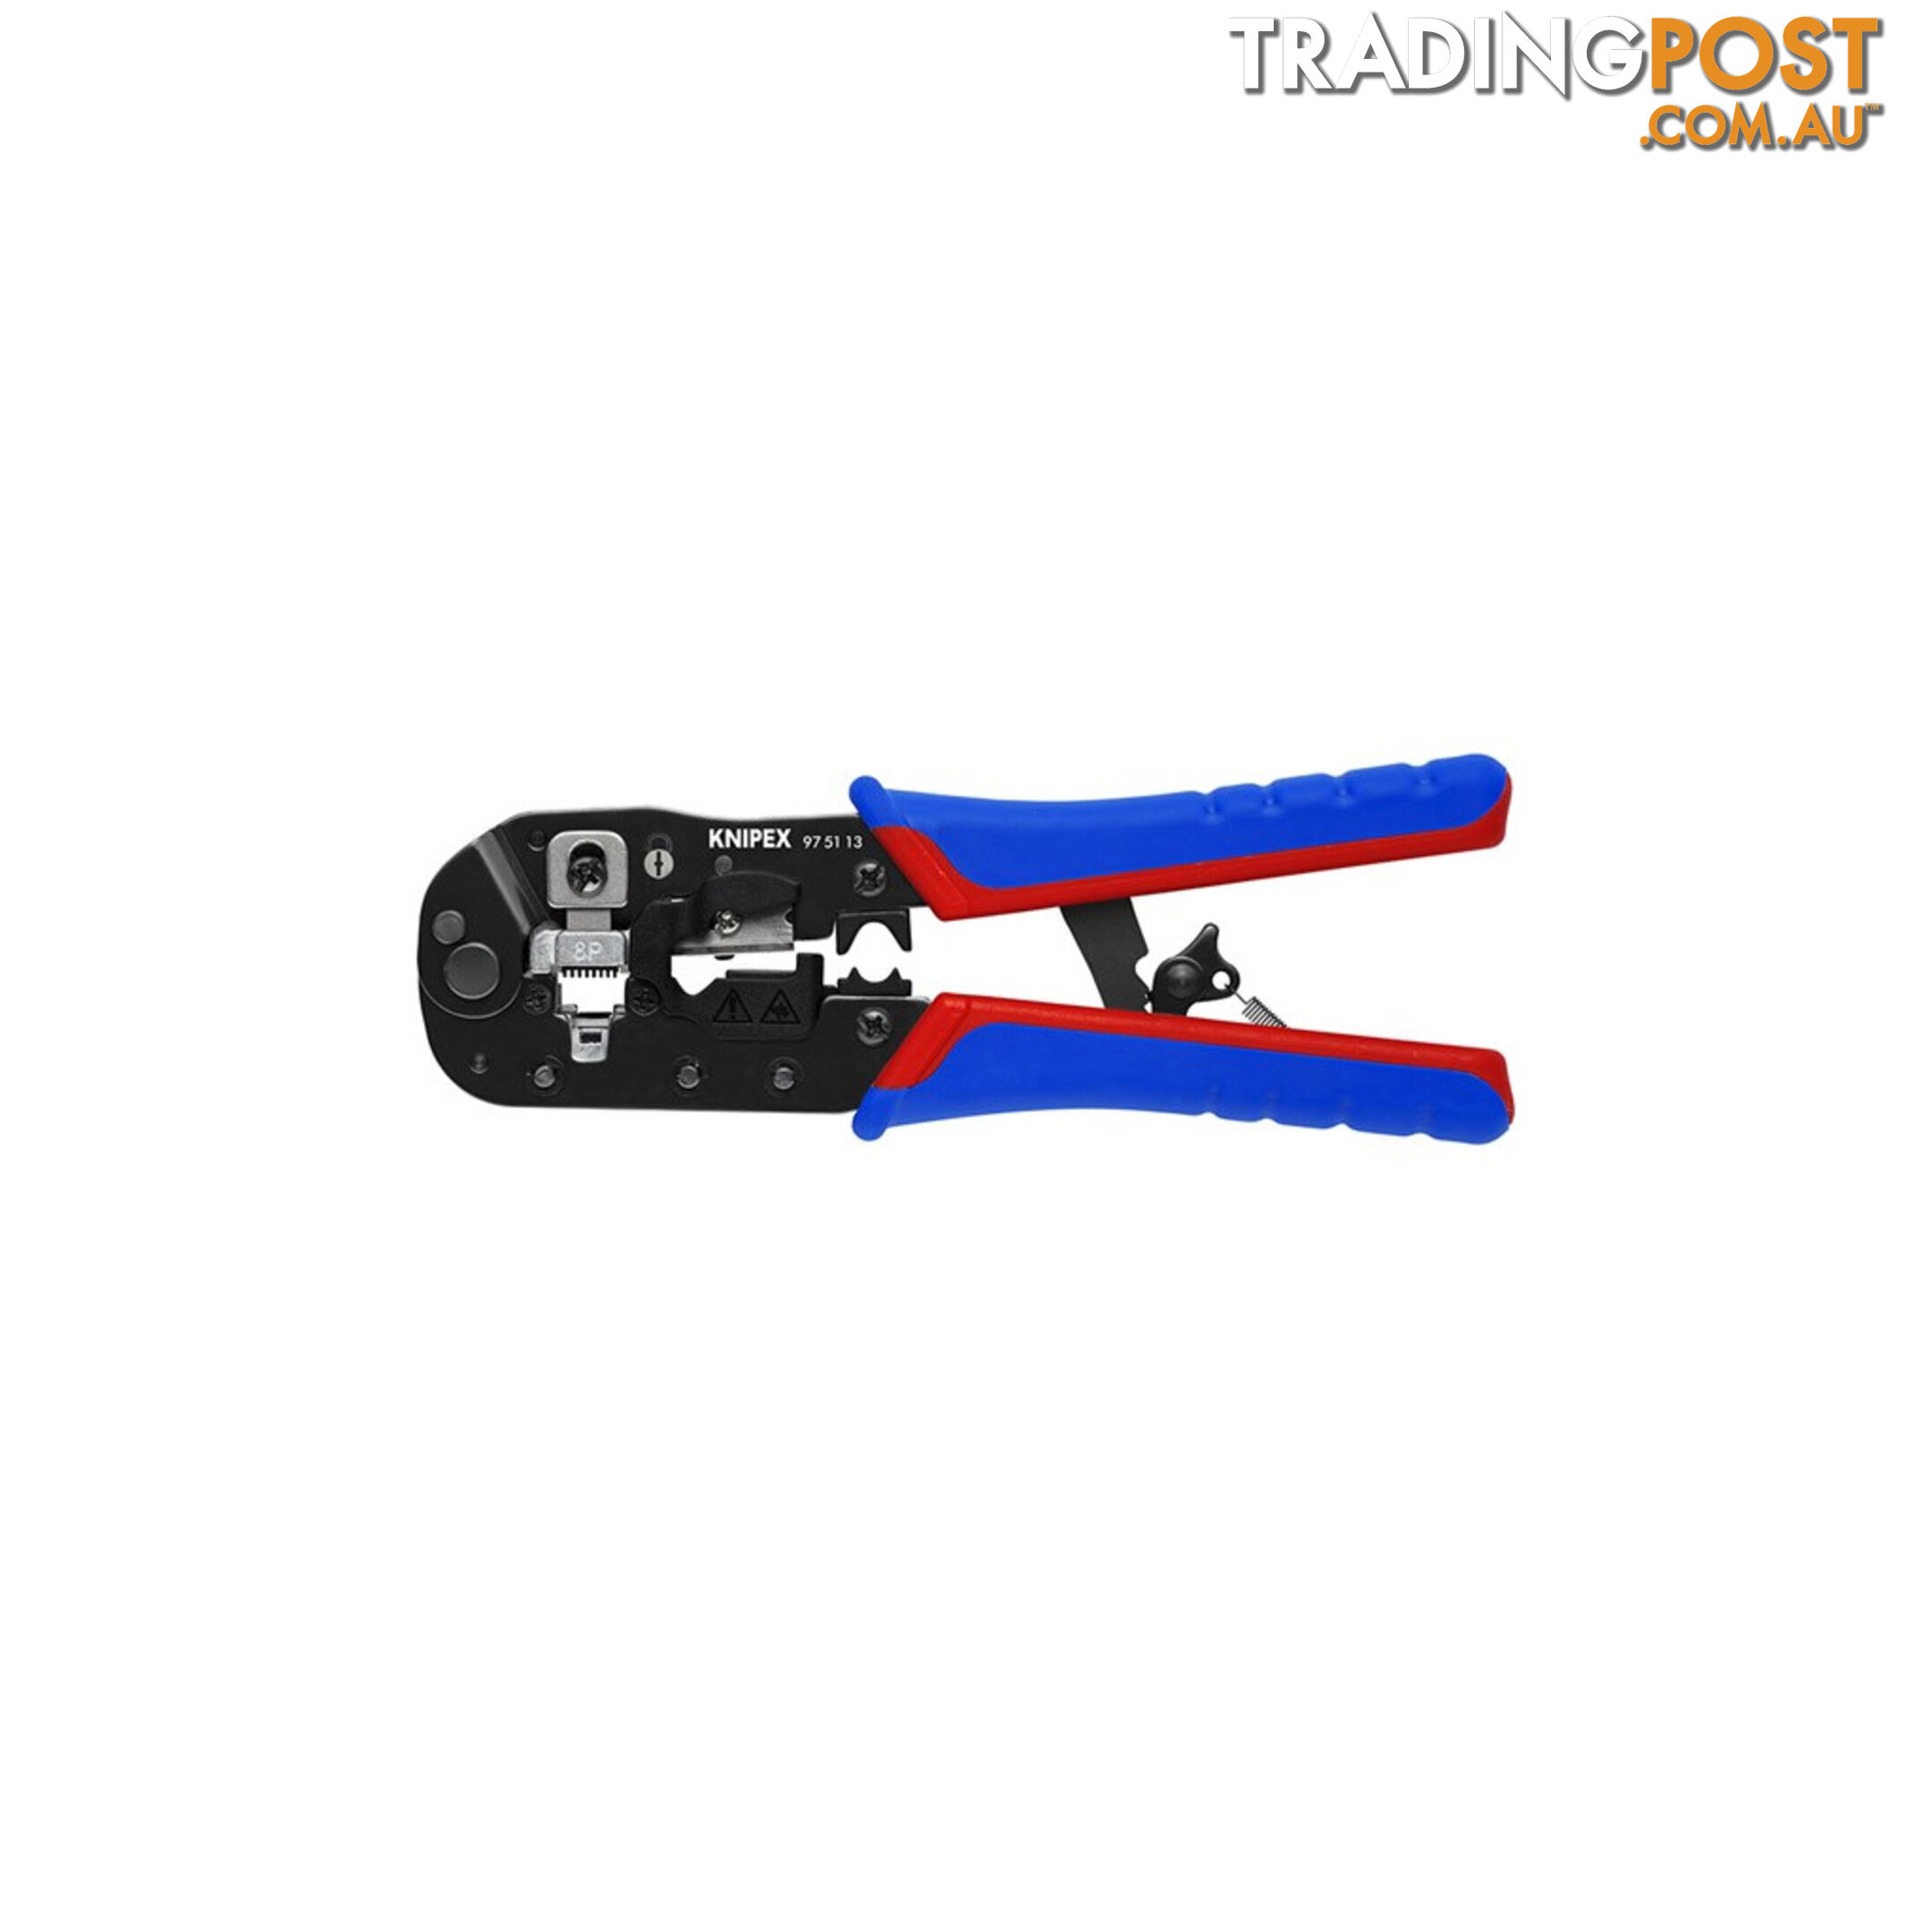 Knipex Crimping Plier for RJ45 Western Plugs 190mm w/ Multi-Component Grips SKU - 975113